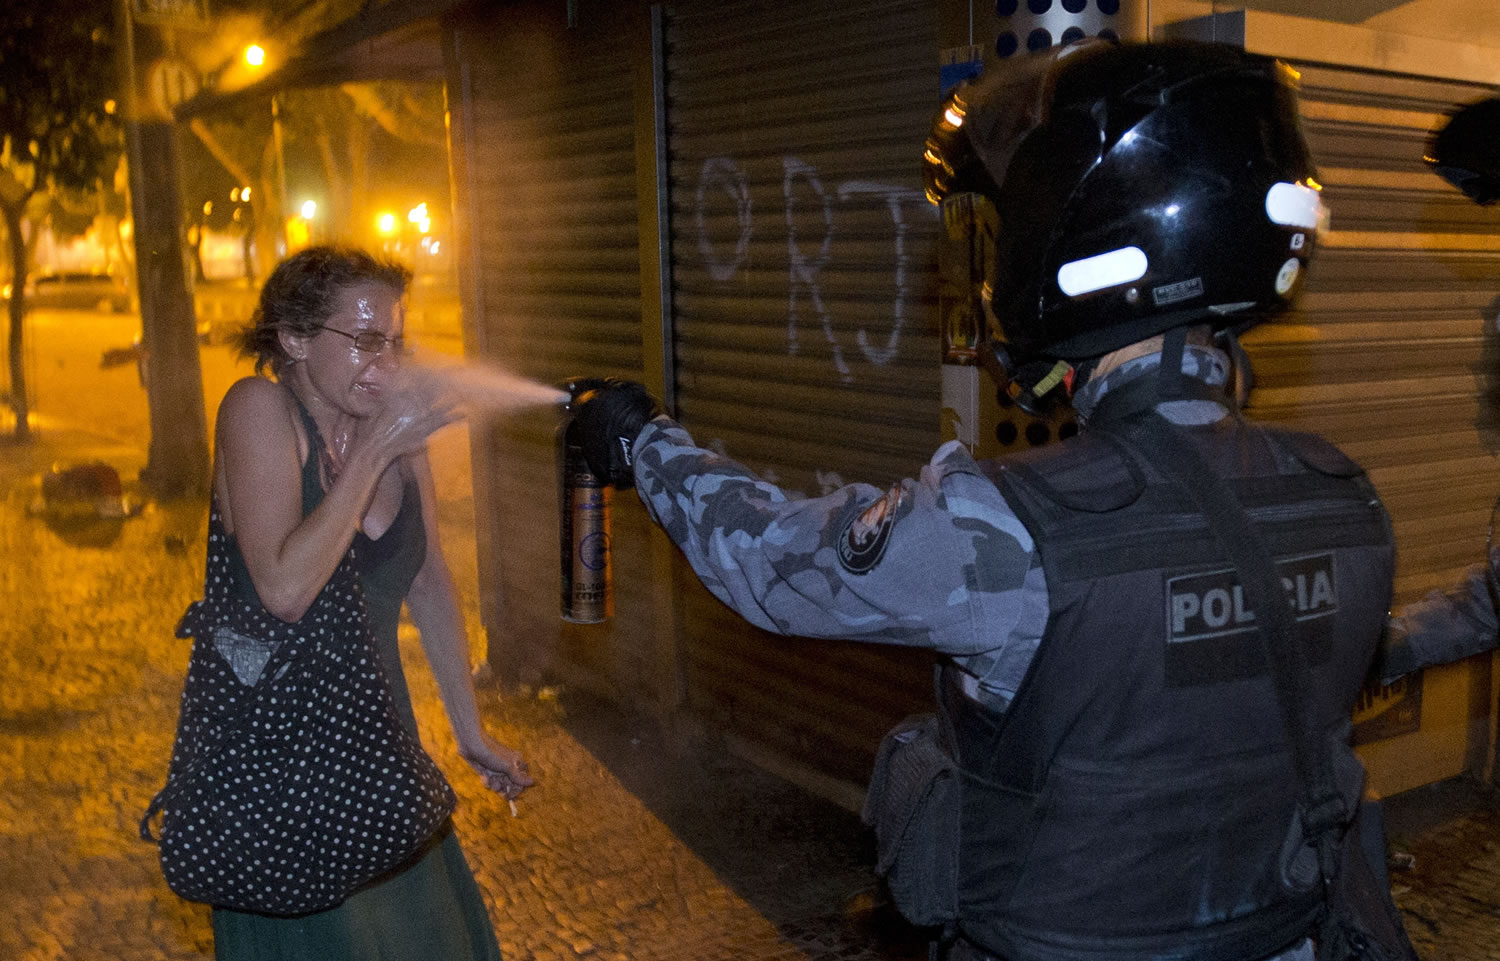 A military policeman pepper sprays a protester during a demonstration in Rio de Janeiro on Monday.